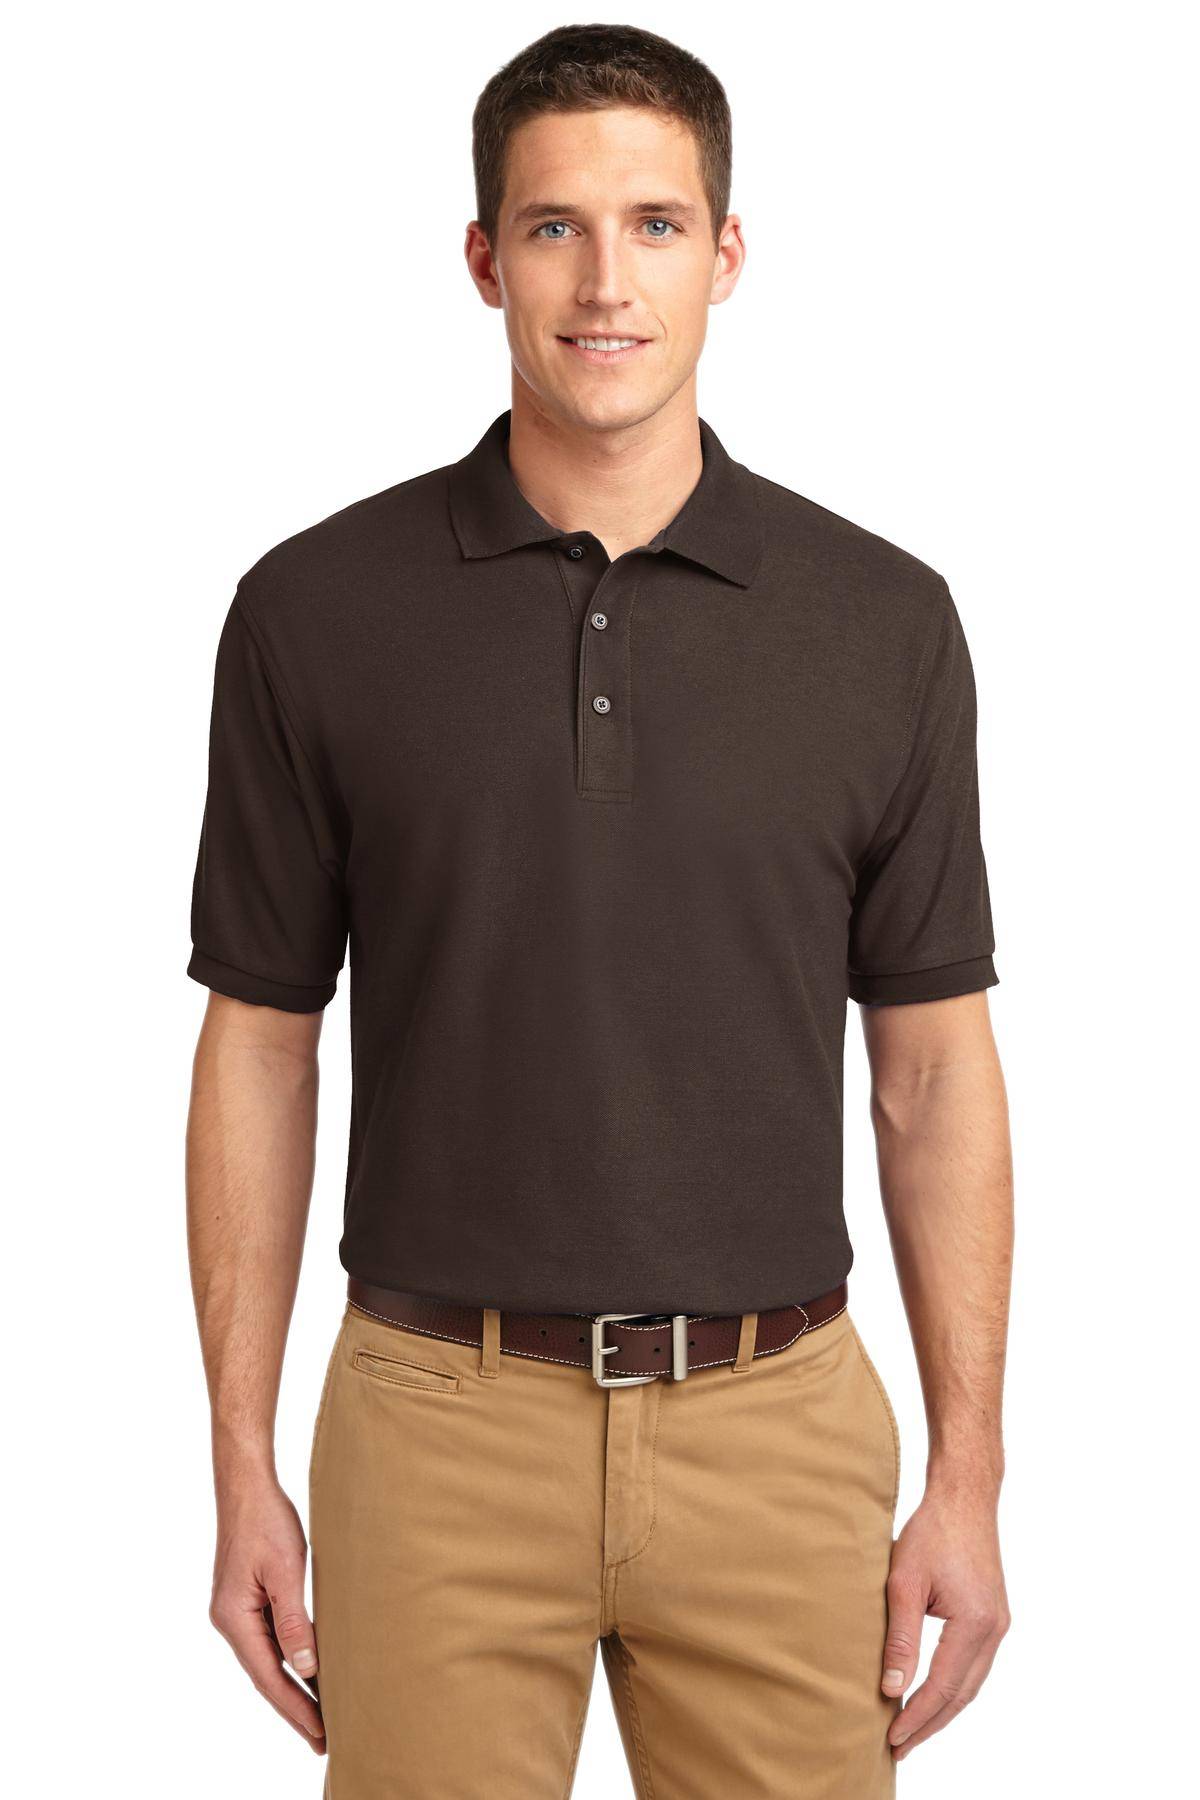 Port Authority TLK500 Mens Big And Tall Short Sleeve Shrink Resistant Silk Touch Polo Shirt